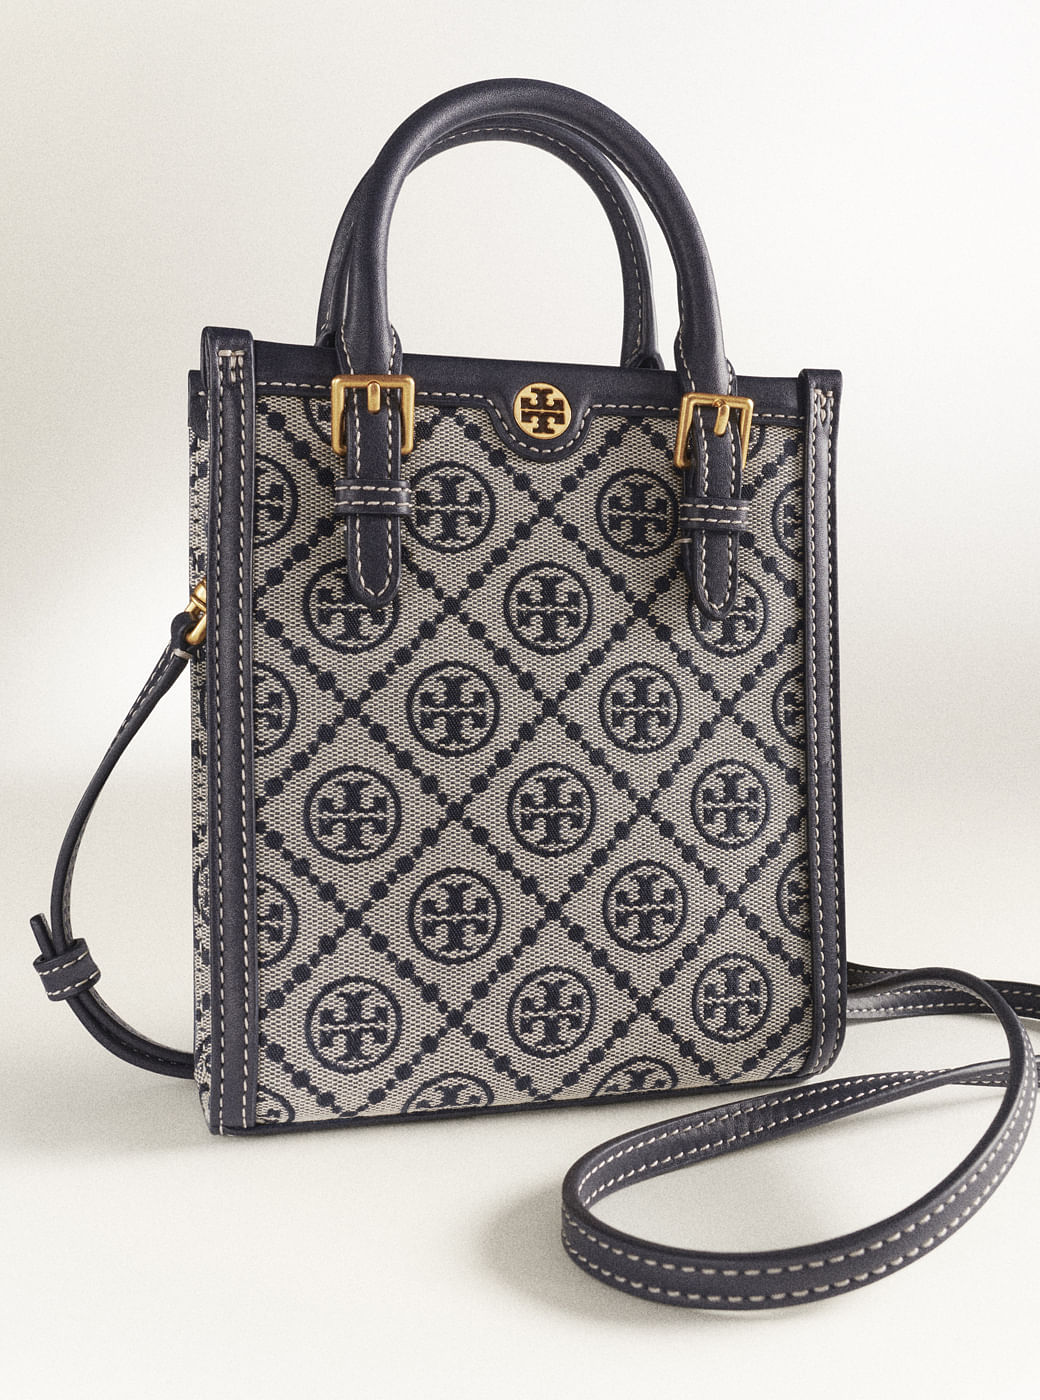 How to wear Tory Burch T Monogram accessories, according to these ...